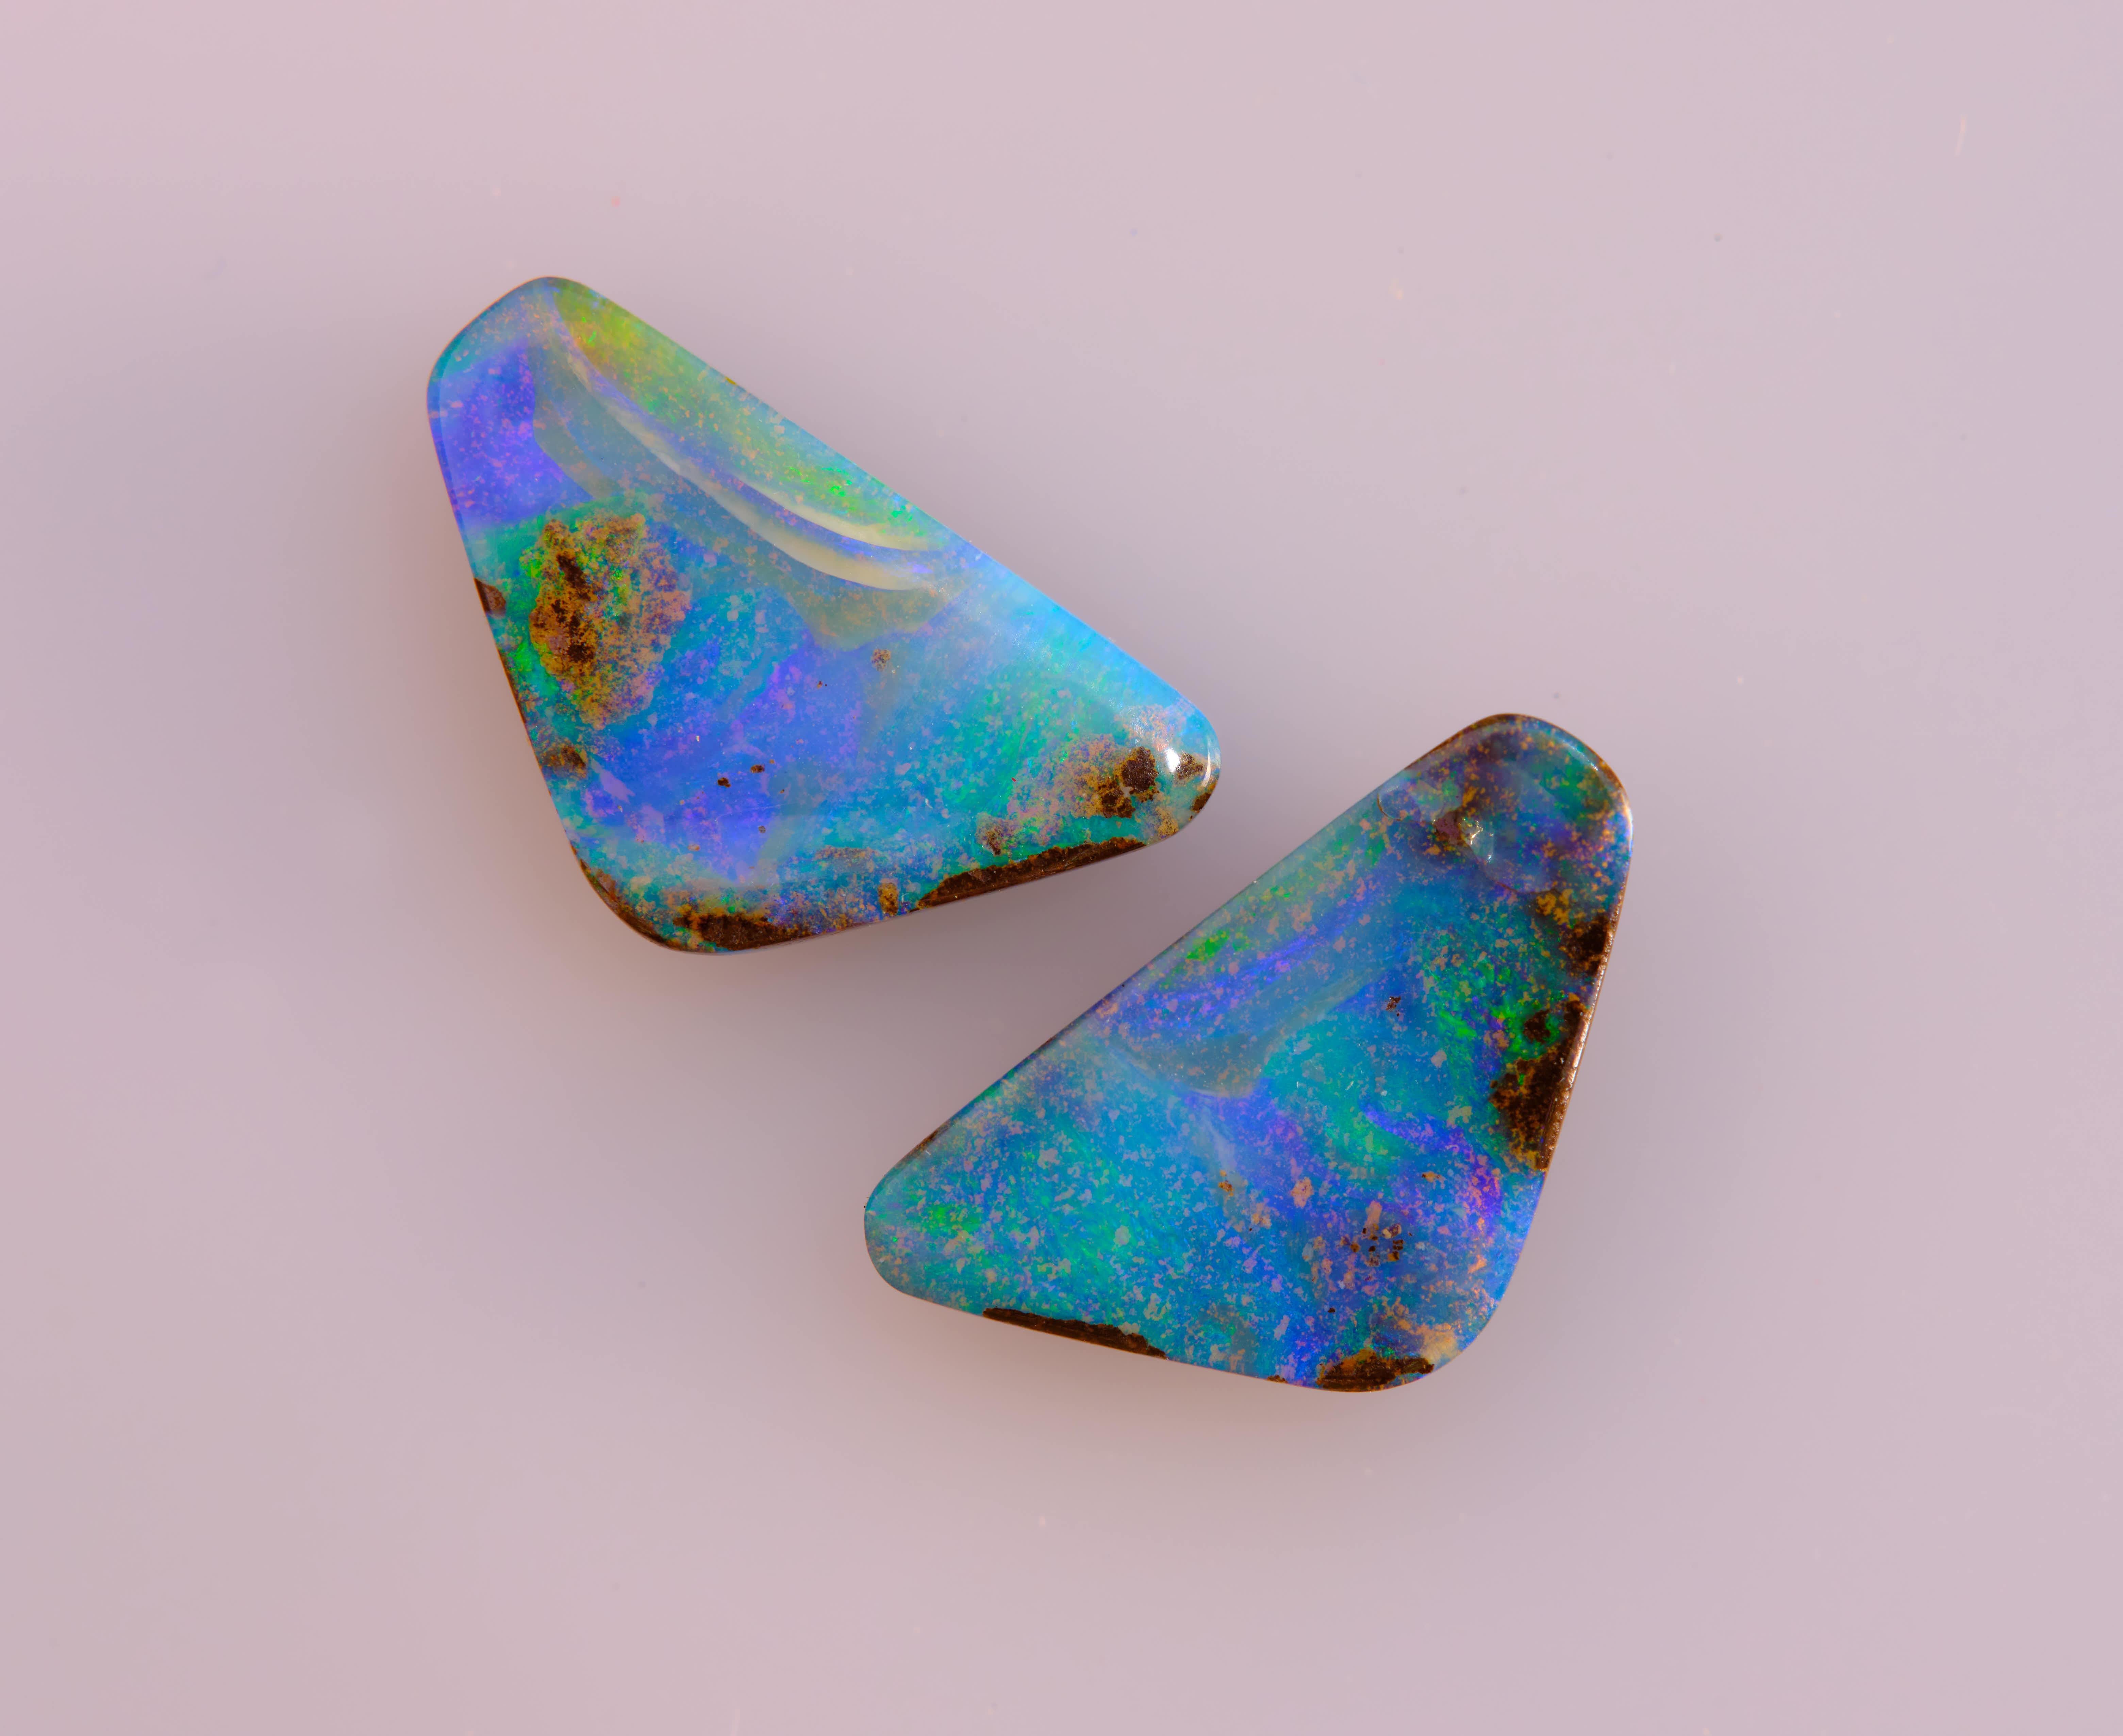 3 ct Opal from Central Queensland, Australia.
Size: 8 x 13 mm

- The design, craftsmanship and sustainability will personalise the pair of Opal that will last for generations.

- Hand-made in Spain and always ethical and sustainable so that you wear